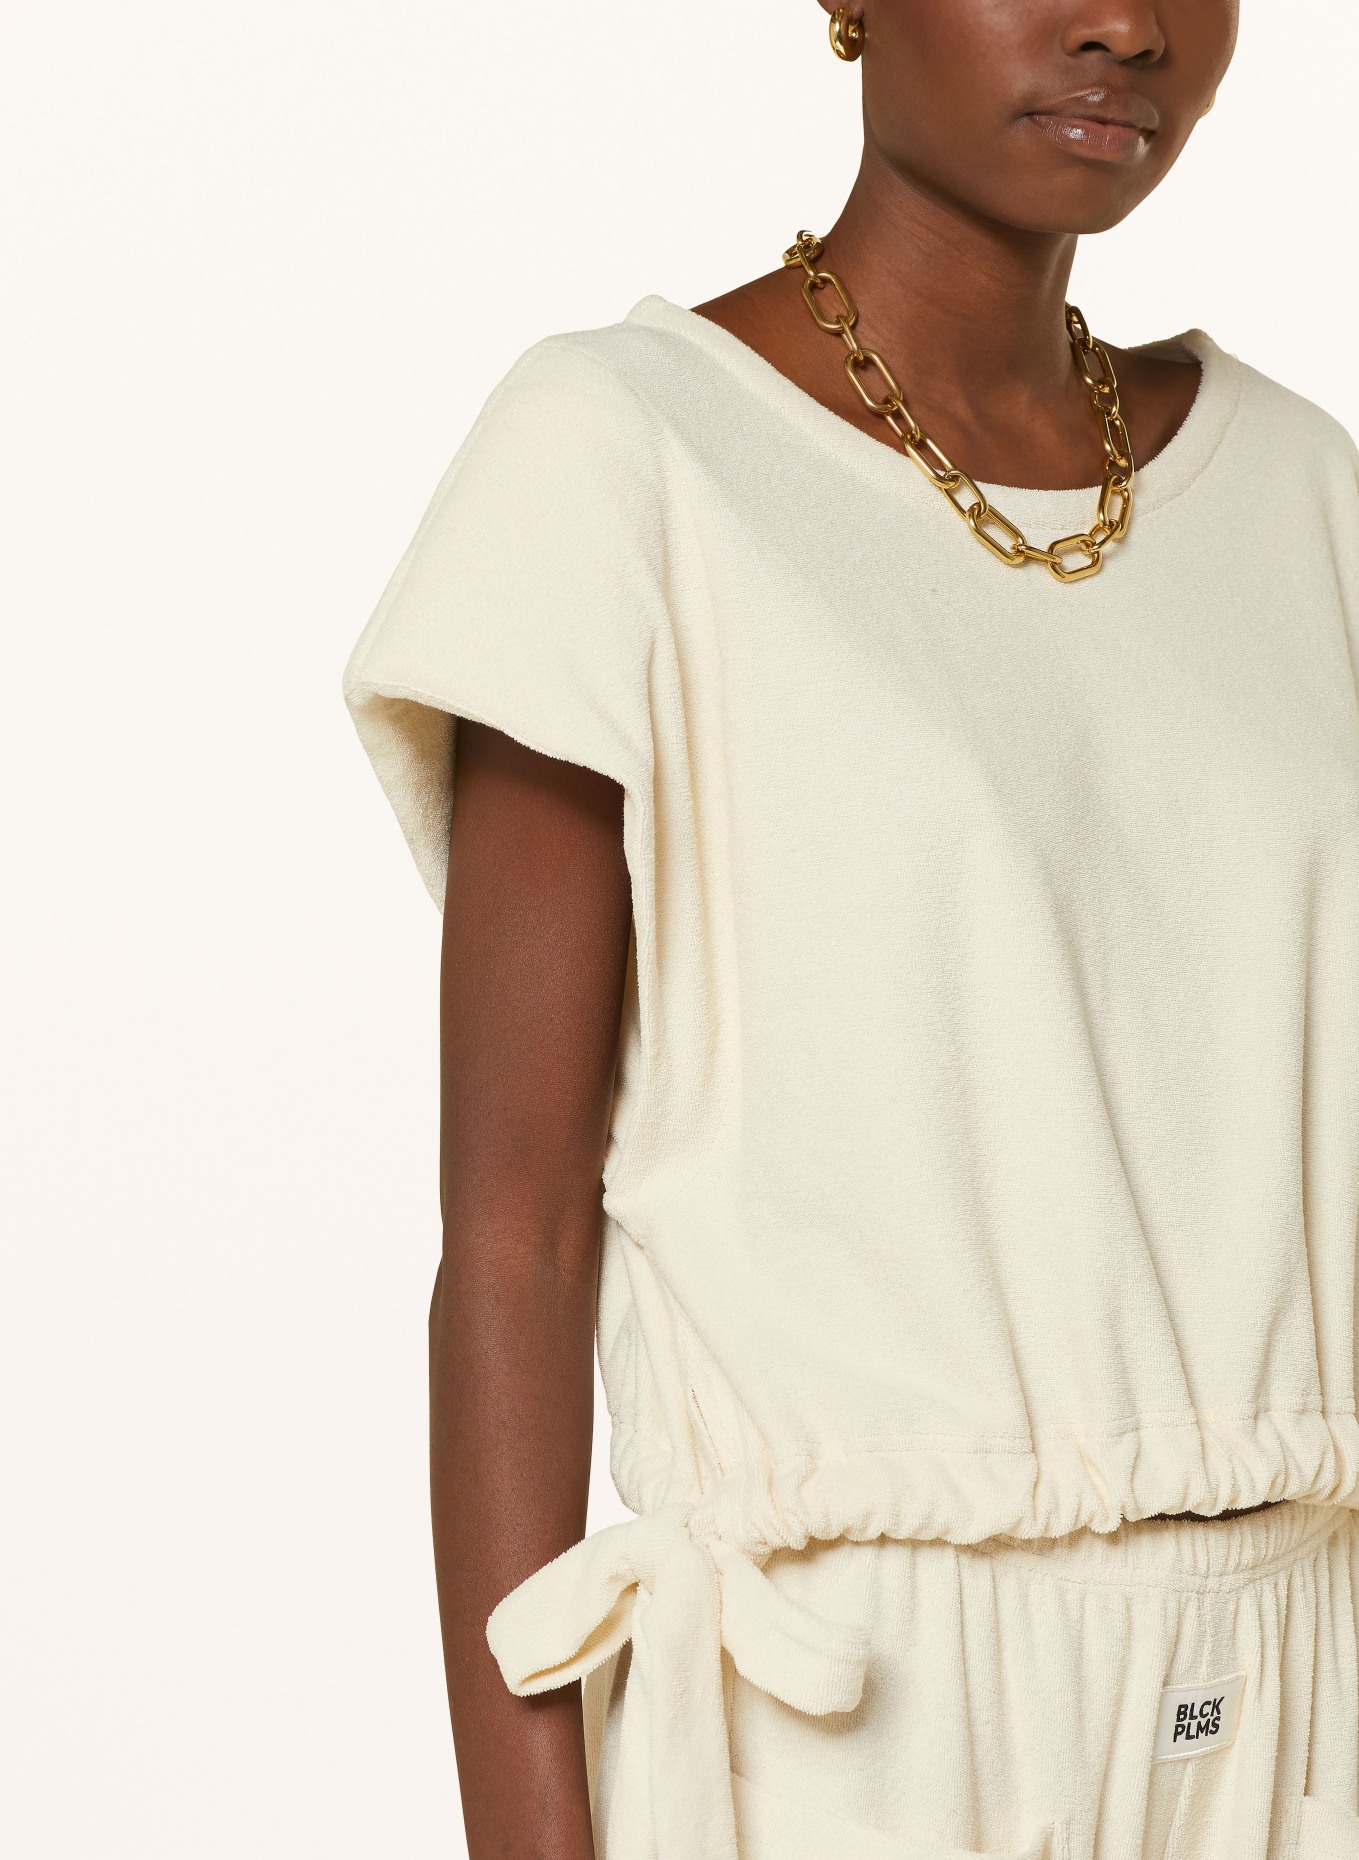 black palms Cropped shirt made of terry cloth, Color: CREAM (Image 4)